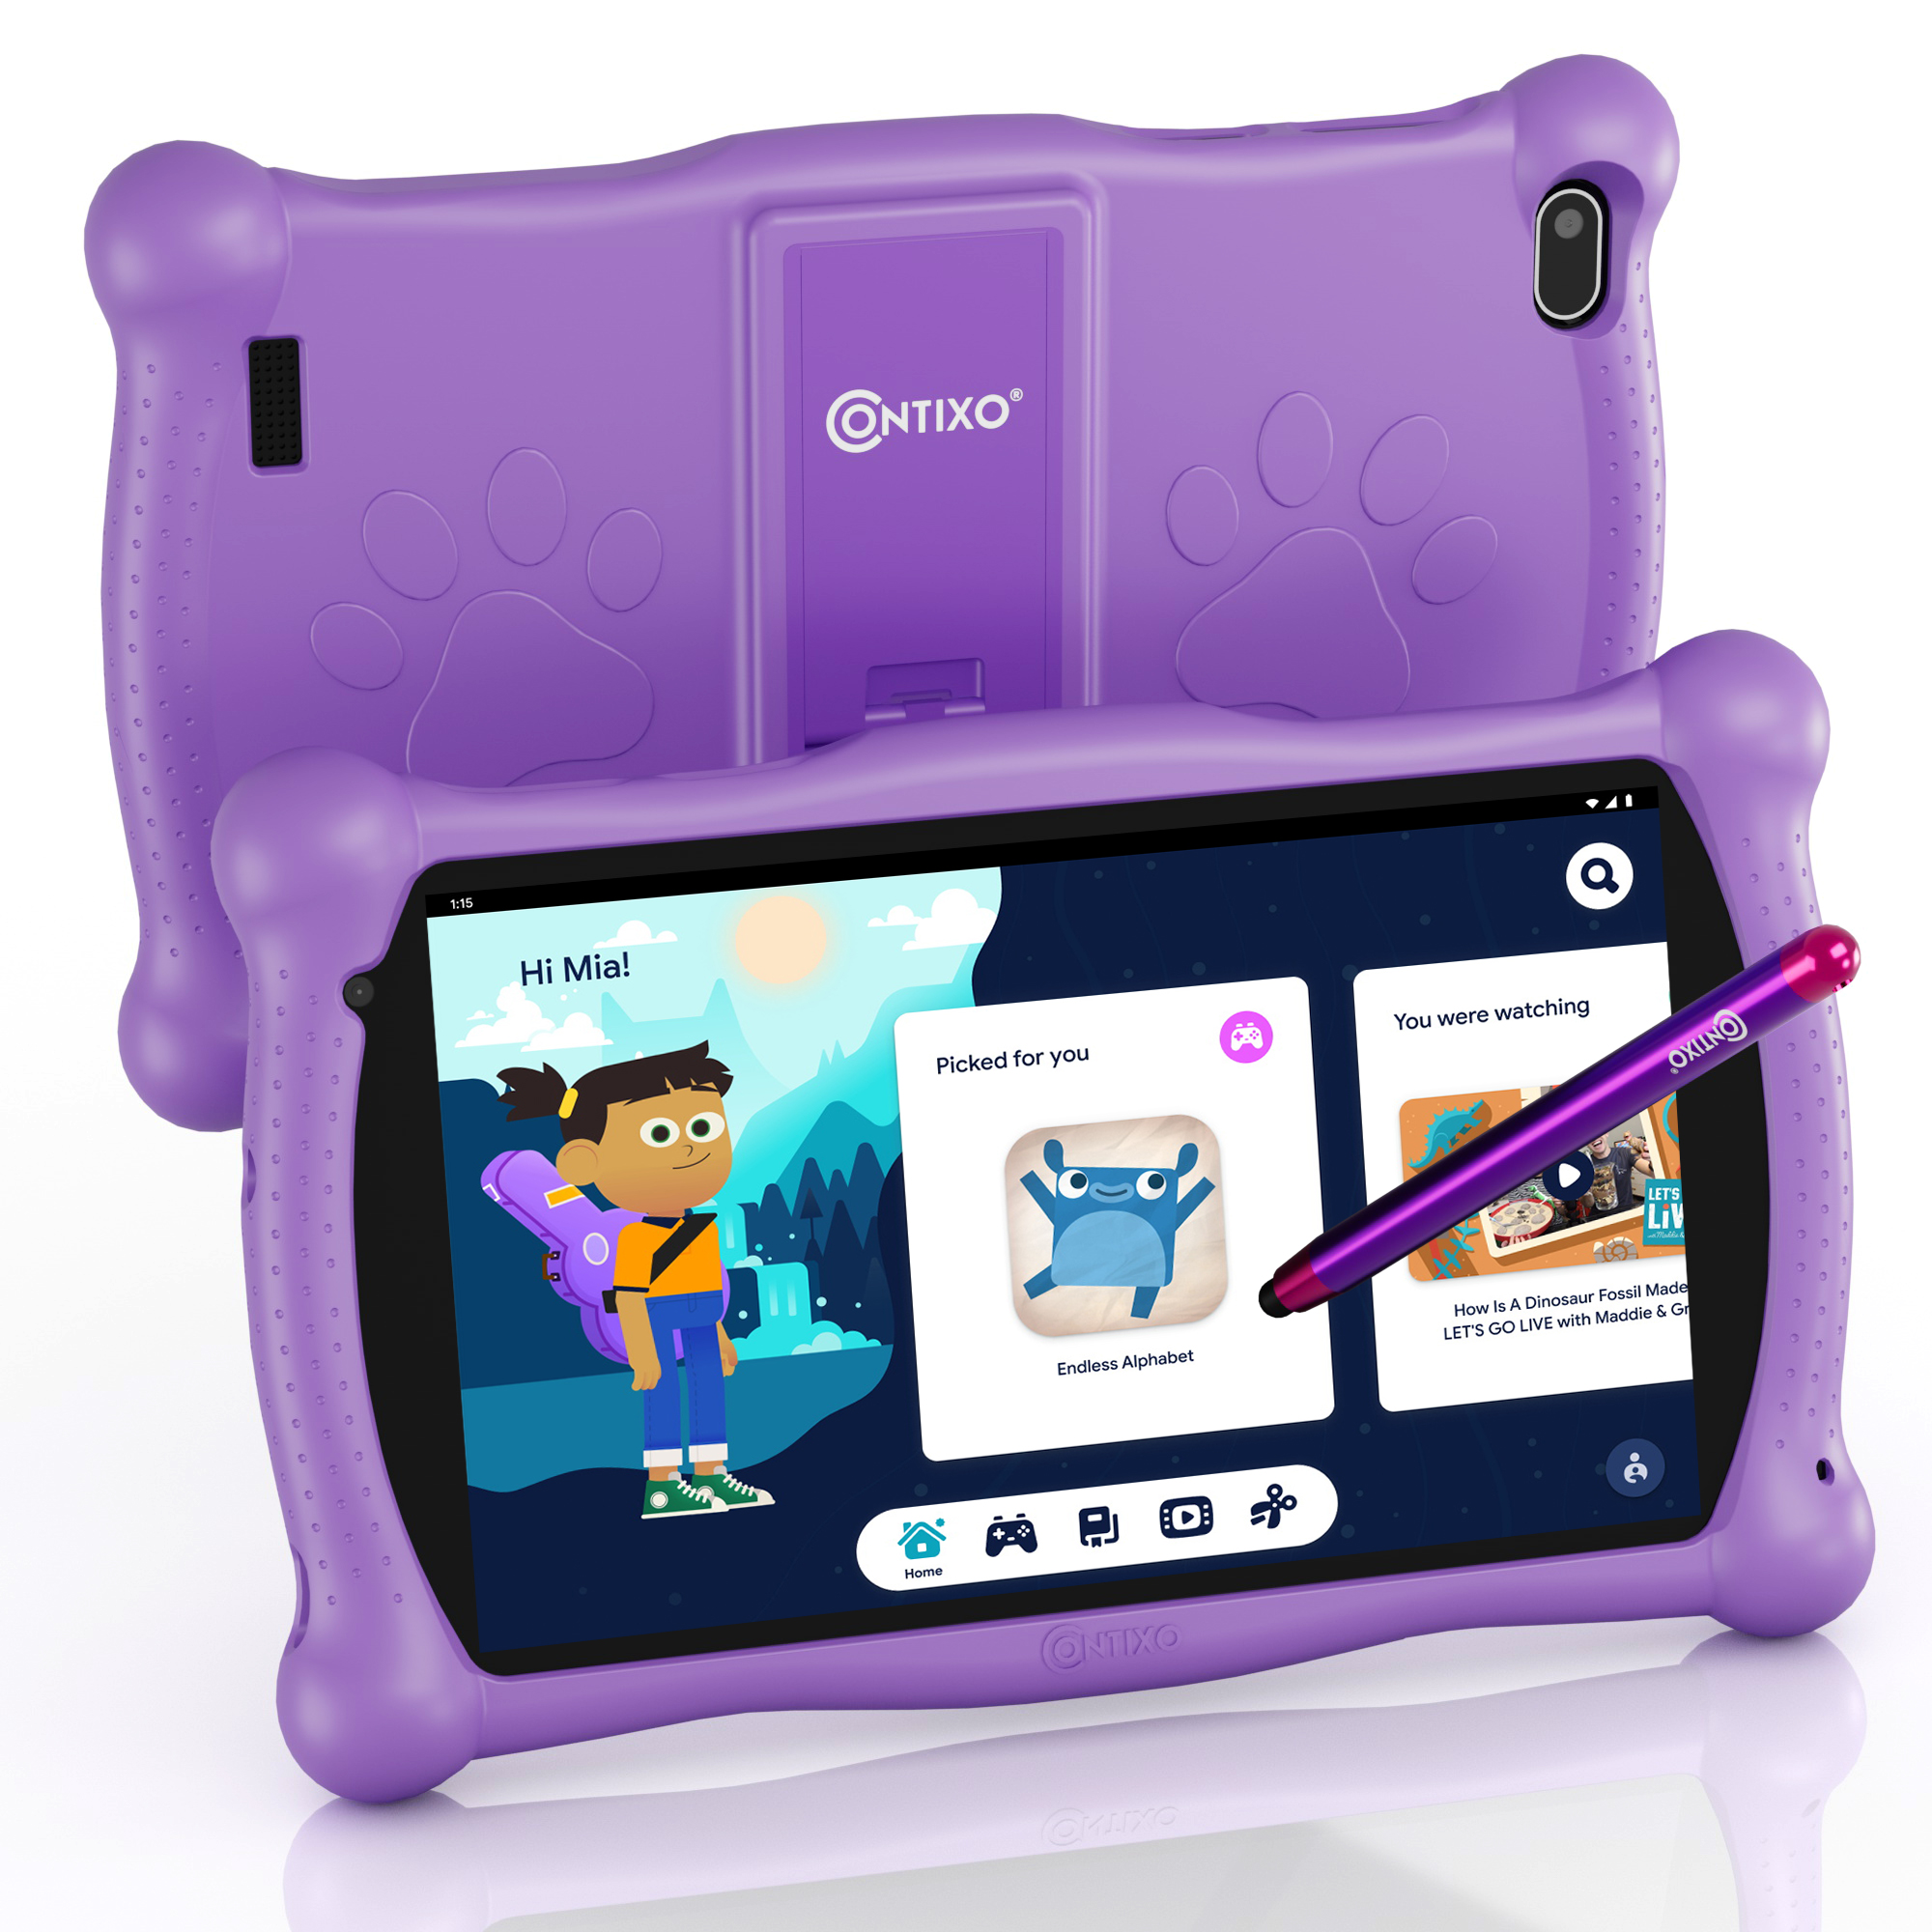 Contixo 7" Kids Learning Tablet HD Touch Screen, WiFi, Android 11, 2GB RAM, 32GB ROM, Protective Case with Kickstand, Age 3-9, V8-3-ST Purple - image 1 of 8